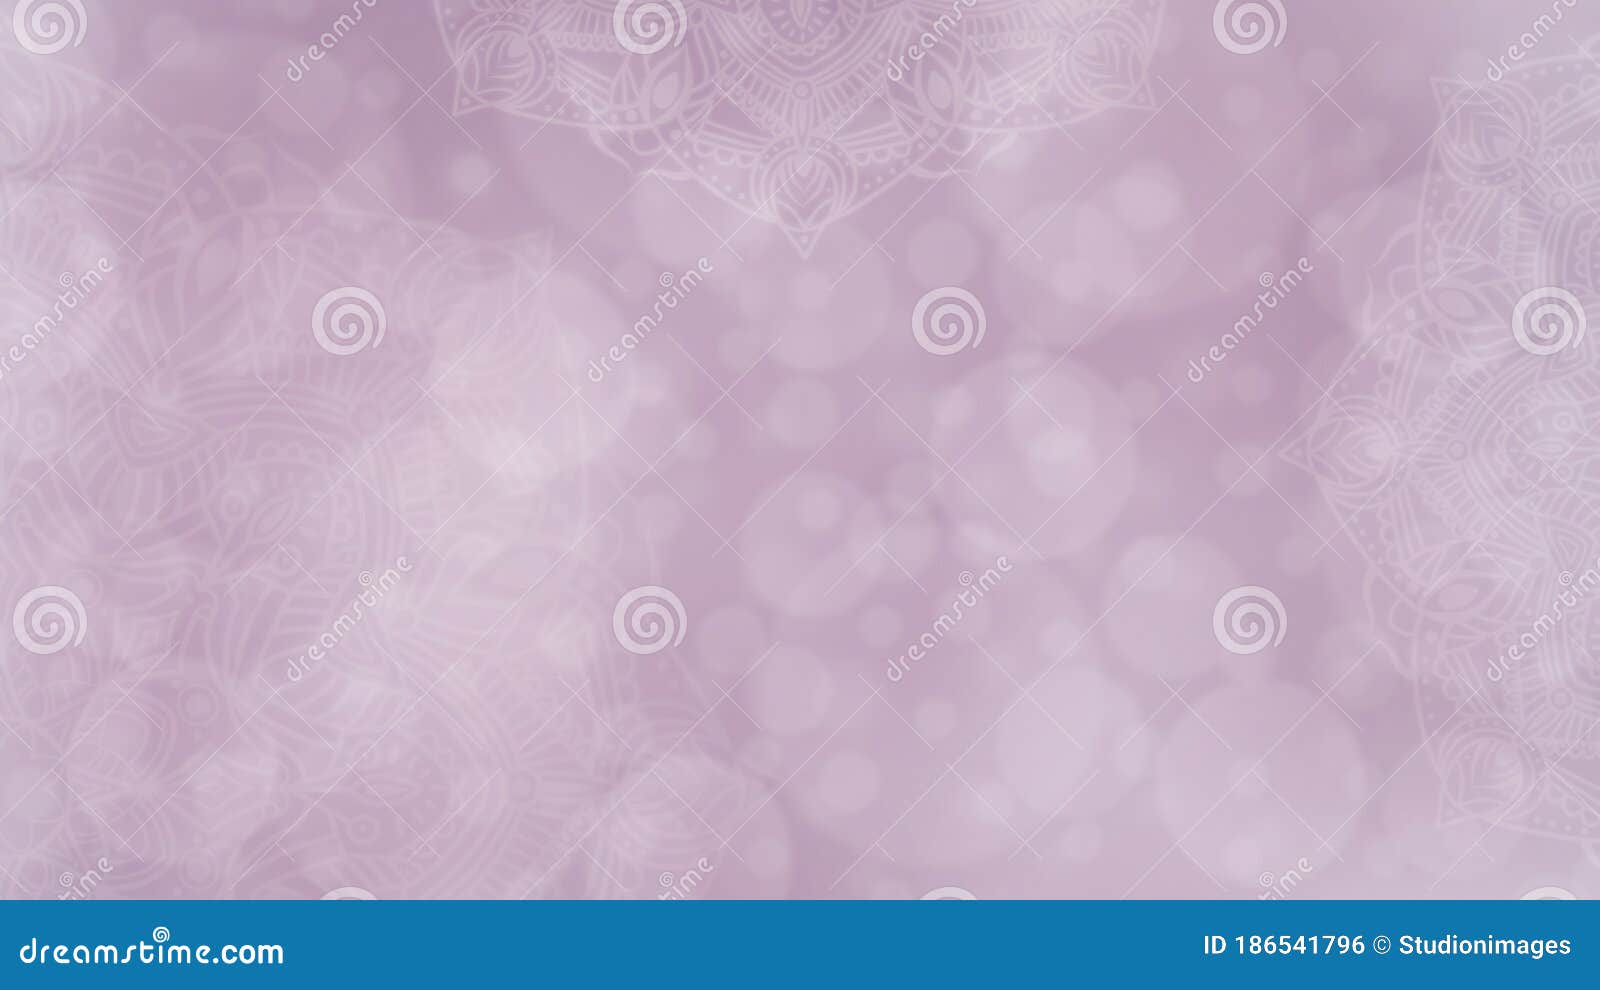 soft pink and mauve textured bokeh background with mandalas